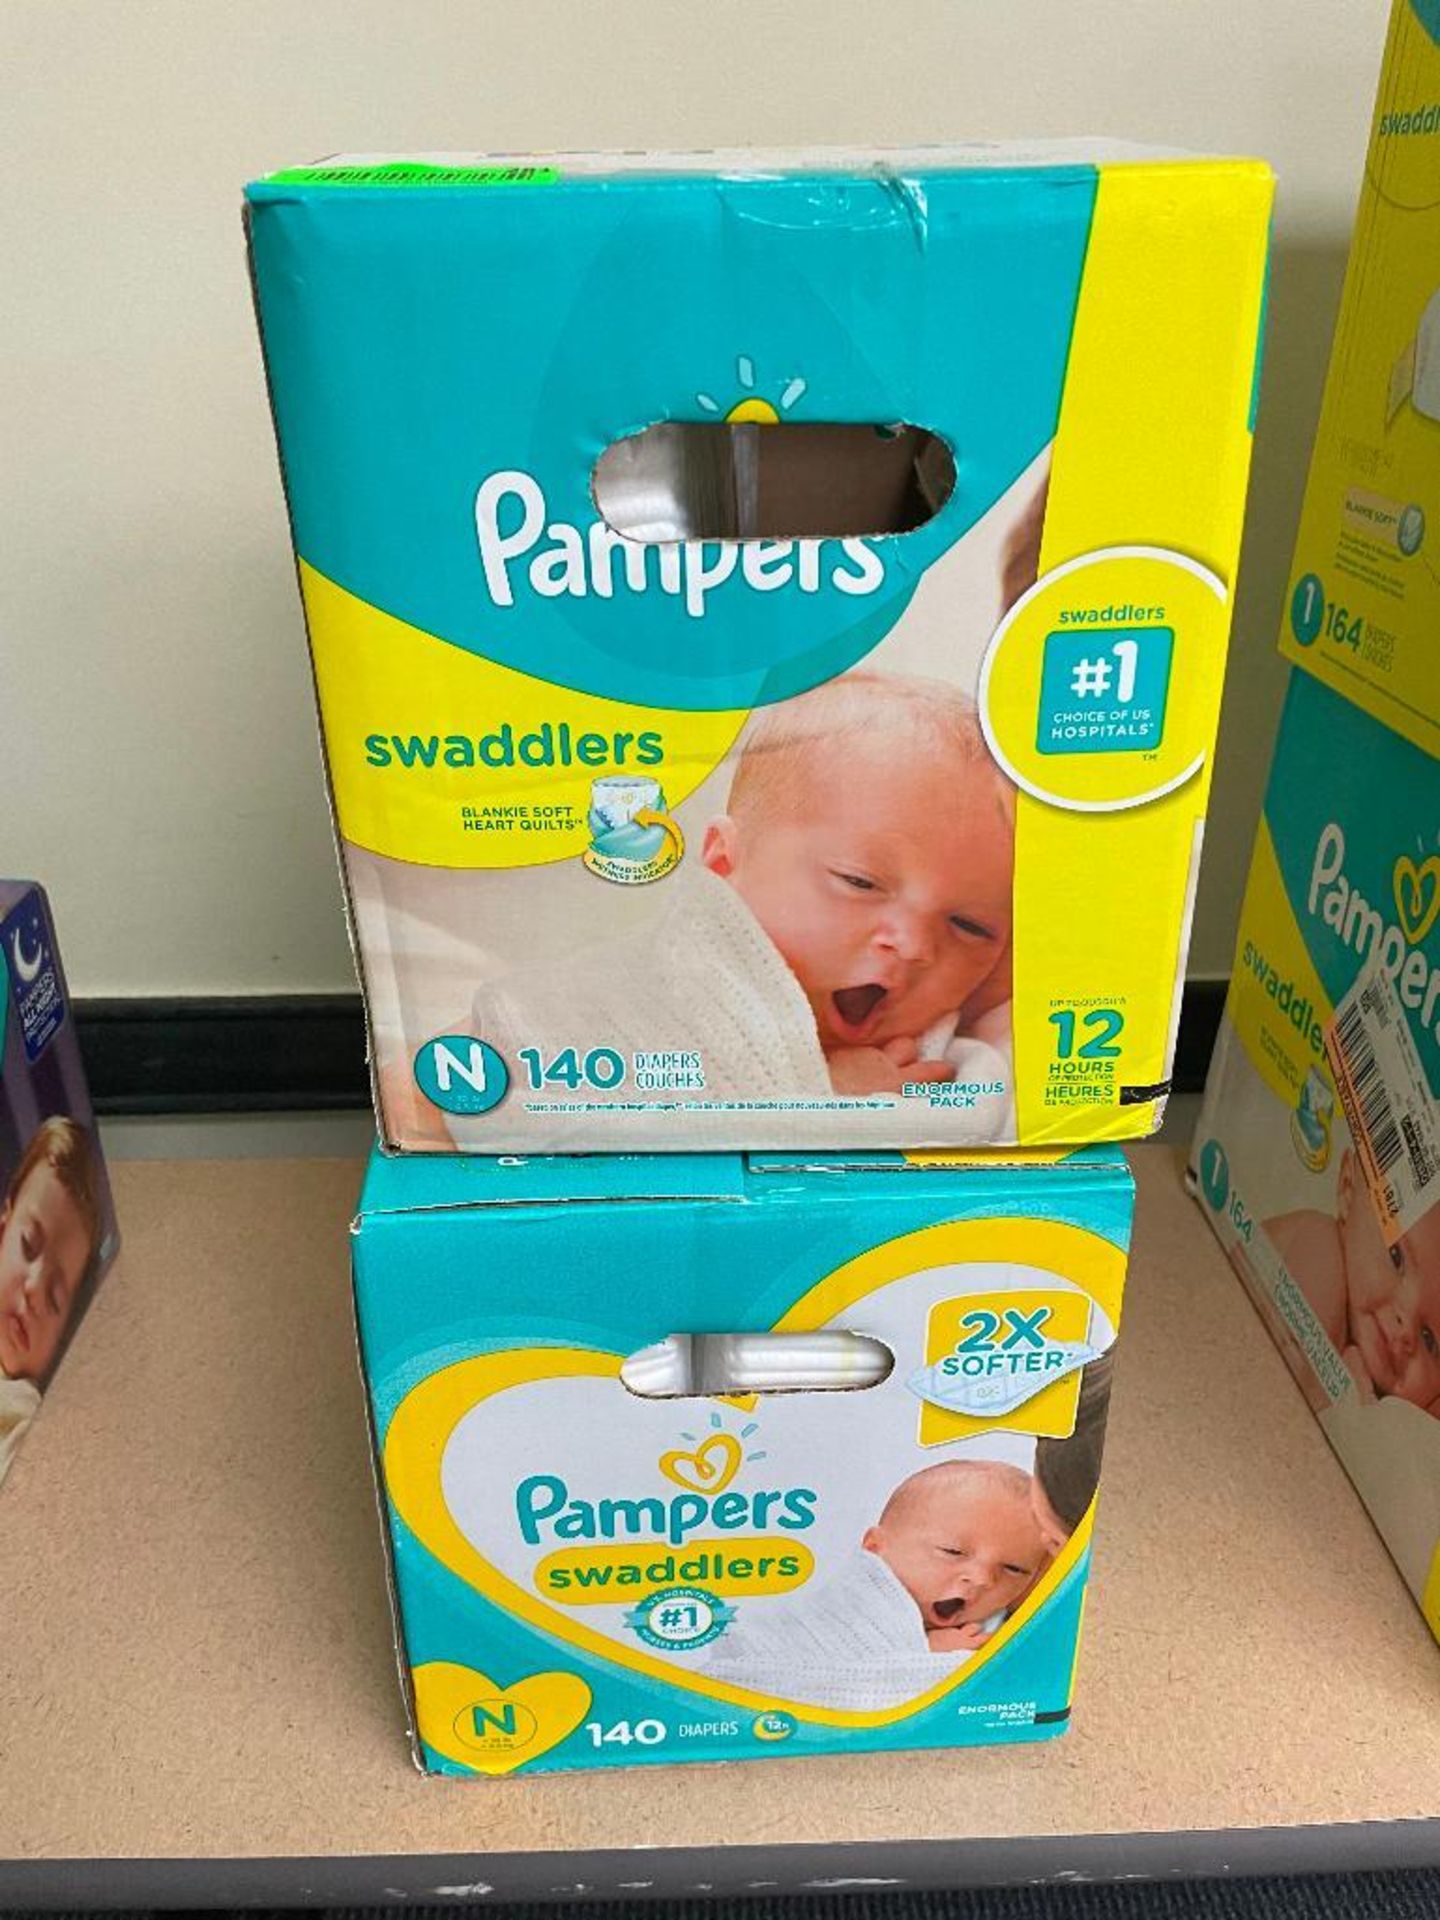 DESCRIPTION: (2) BOXES OF PAMPERS SWADDLERS SIZE N LOCATION: BASEMENT CONFERENCE ROOM QTY: 2